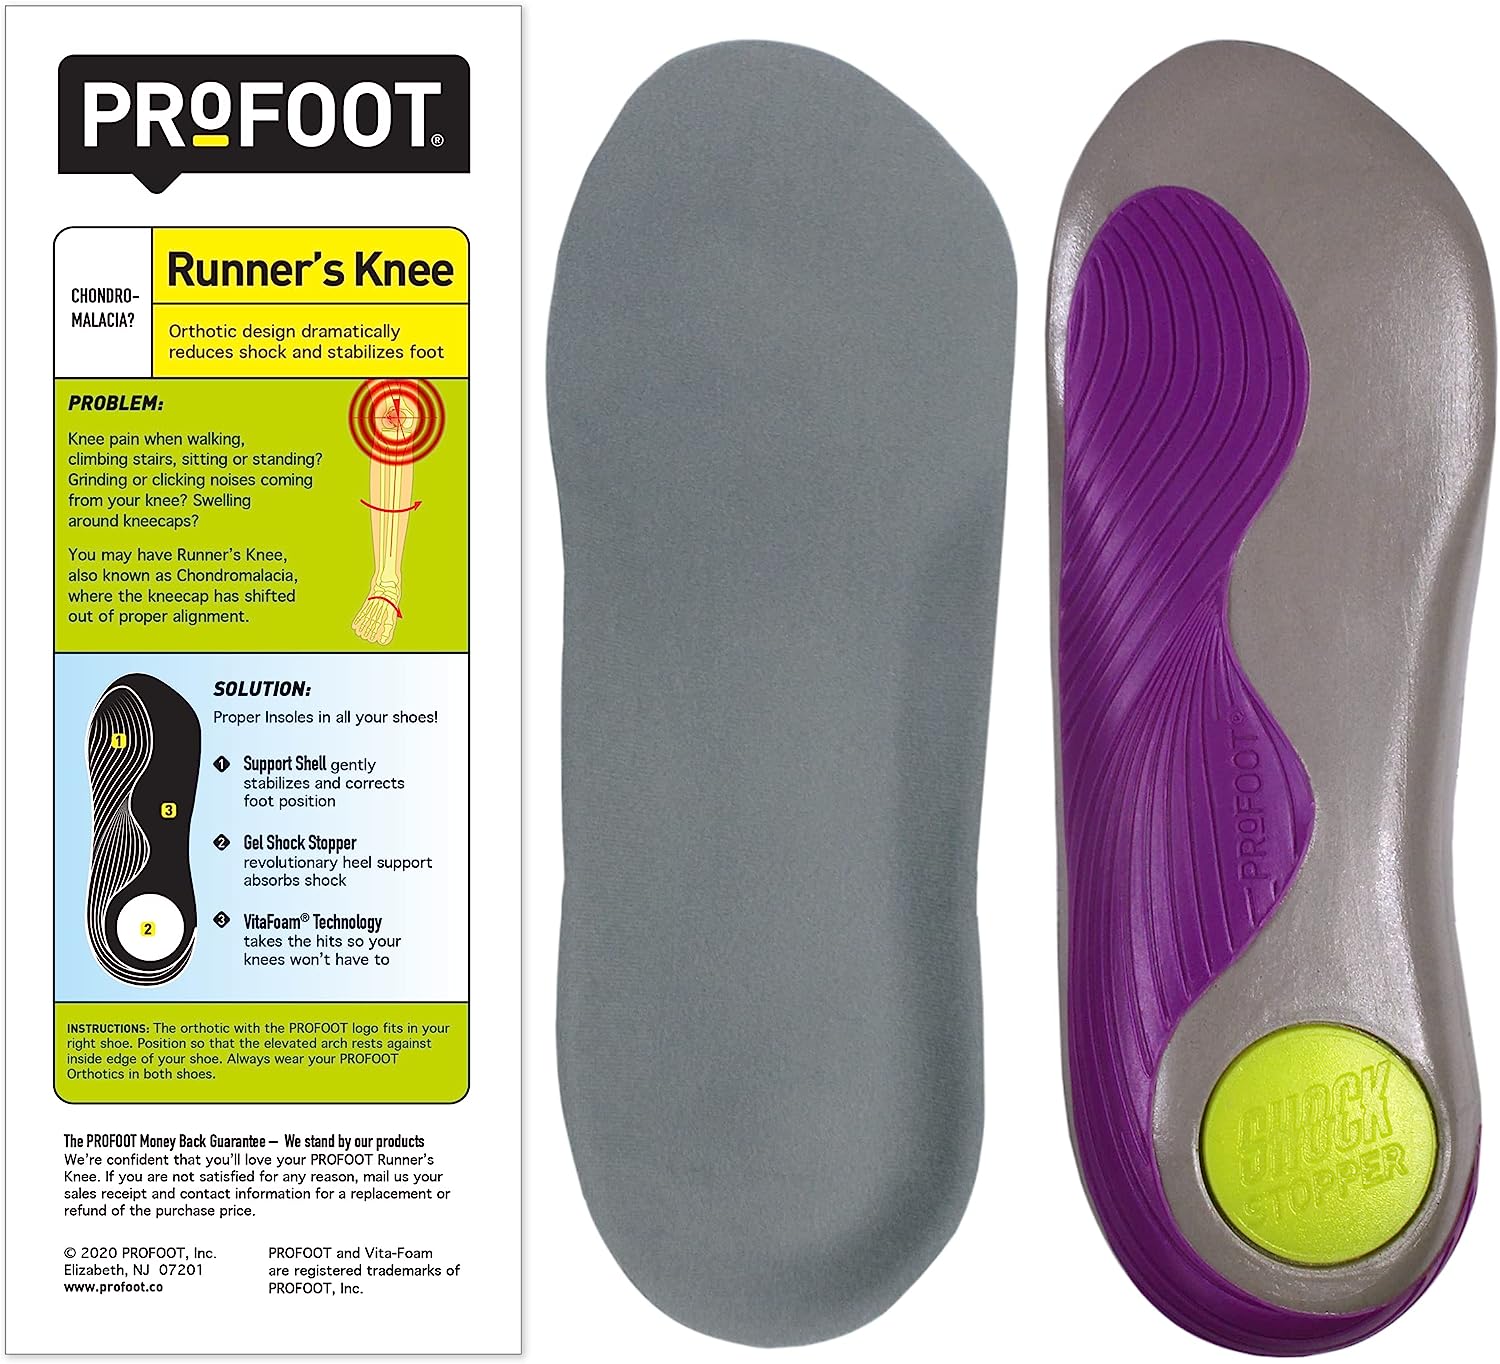 PROFOOT Runner's Knee Orthotic Insole, Women's 6-10, [...]